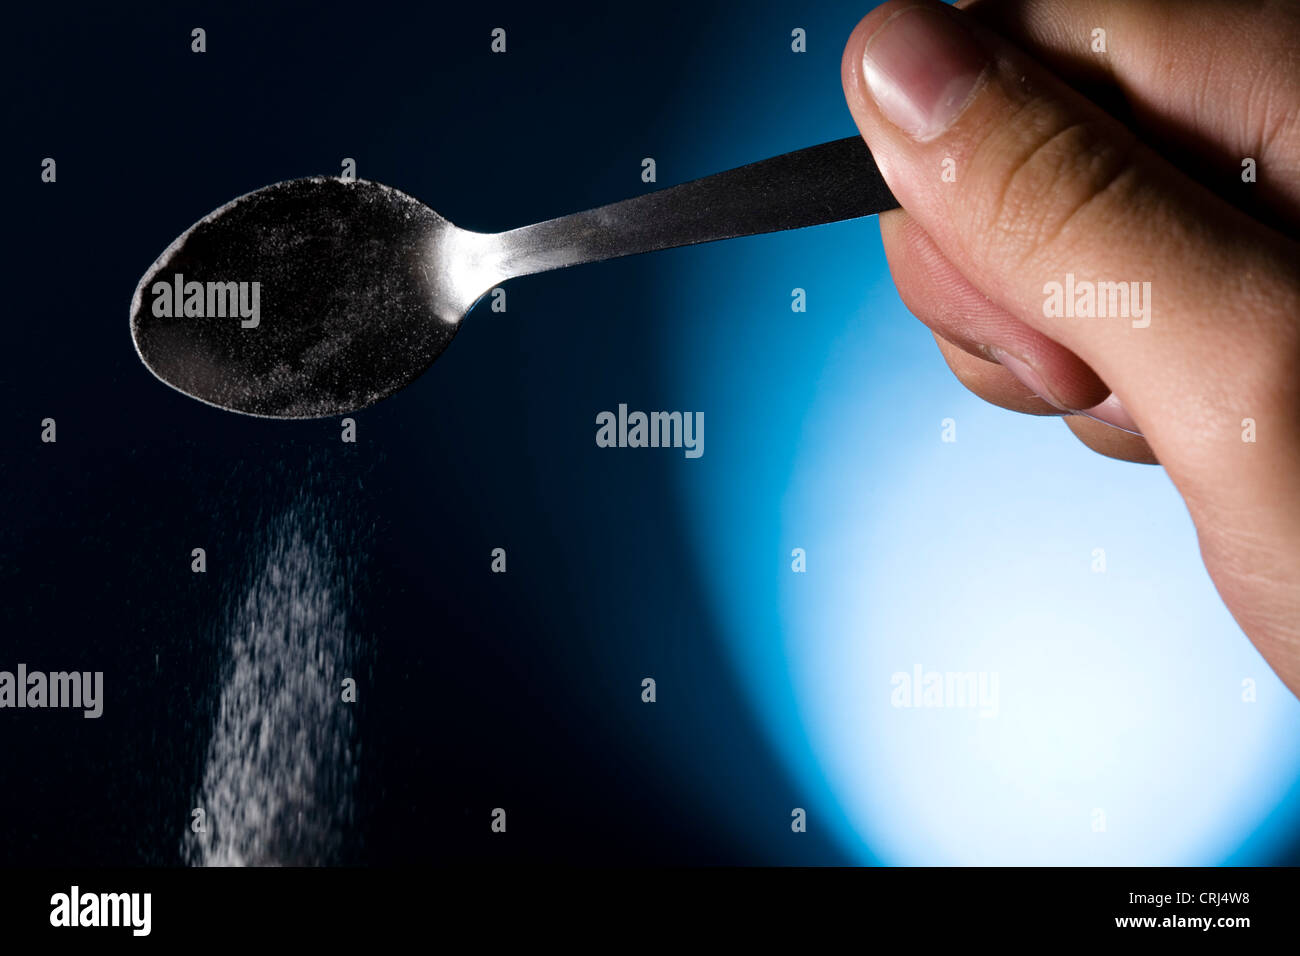 Salt spilling out from a spoon. Stock Photo